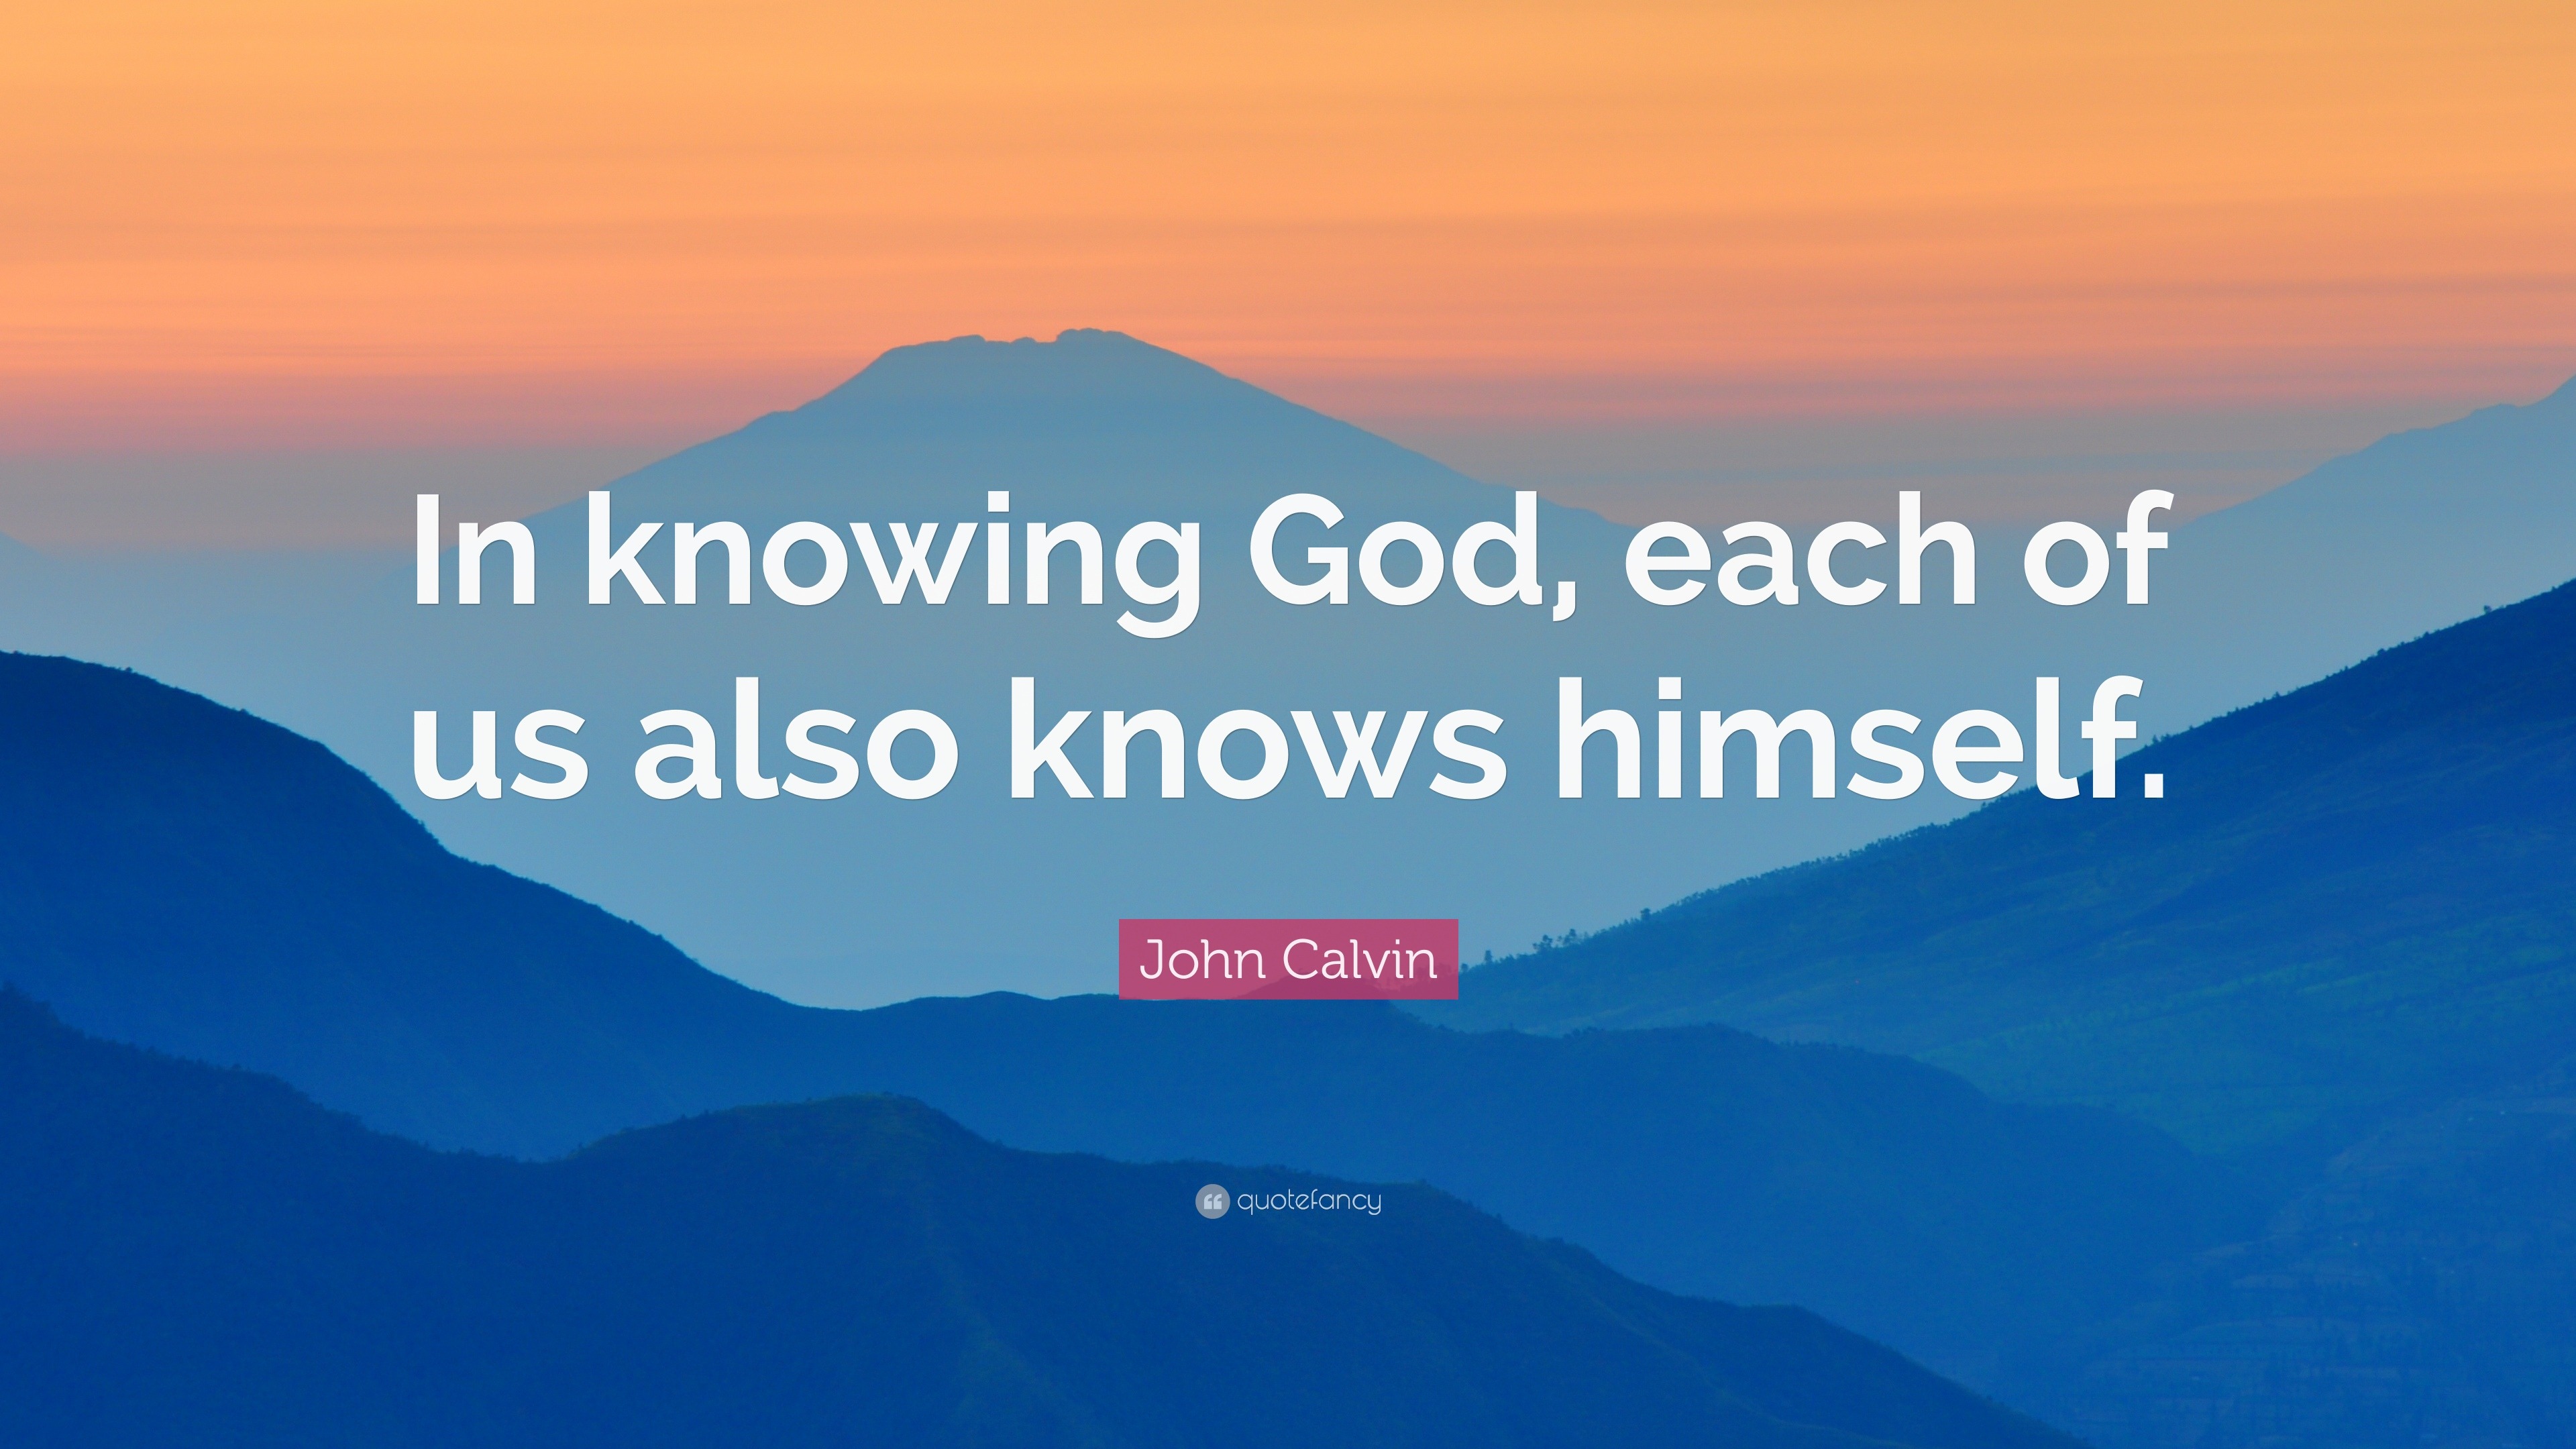 John Calvin Quote “in Knowing God Each Of Us Also Knows Himself”